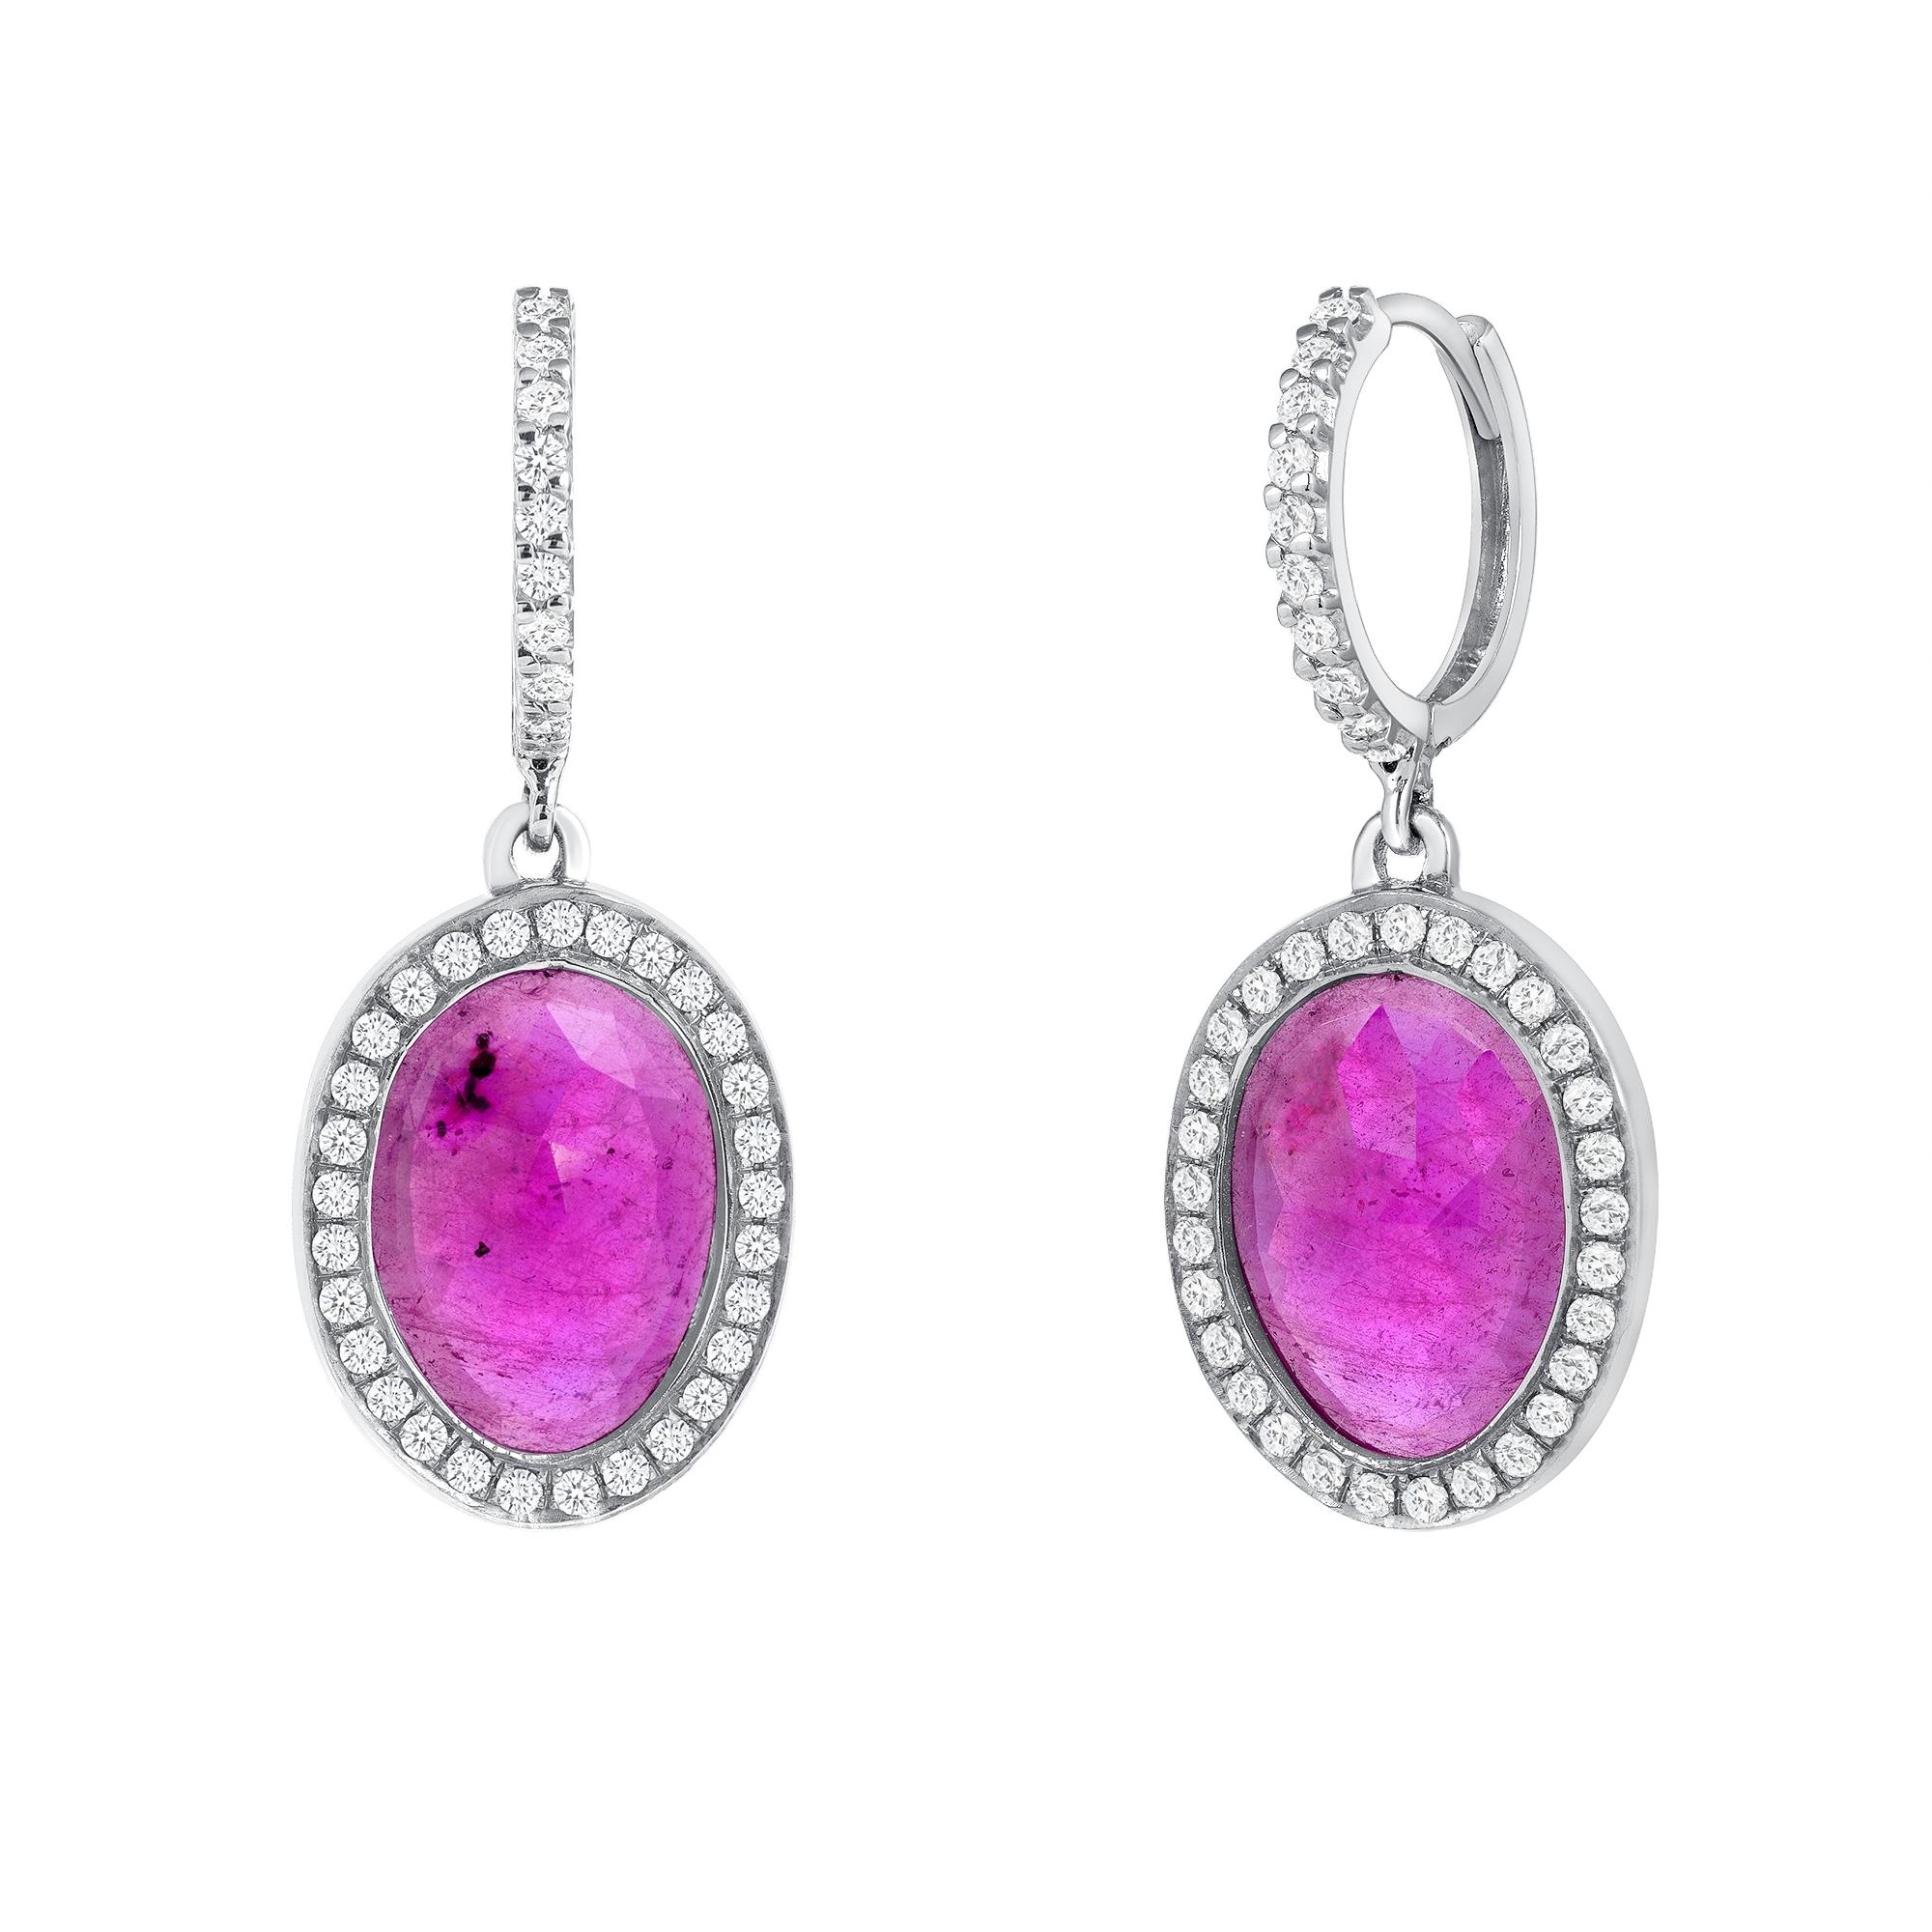 Round Cut White Gold Ruby Earrings Set For Sale